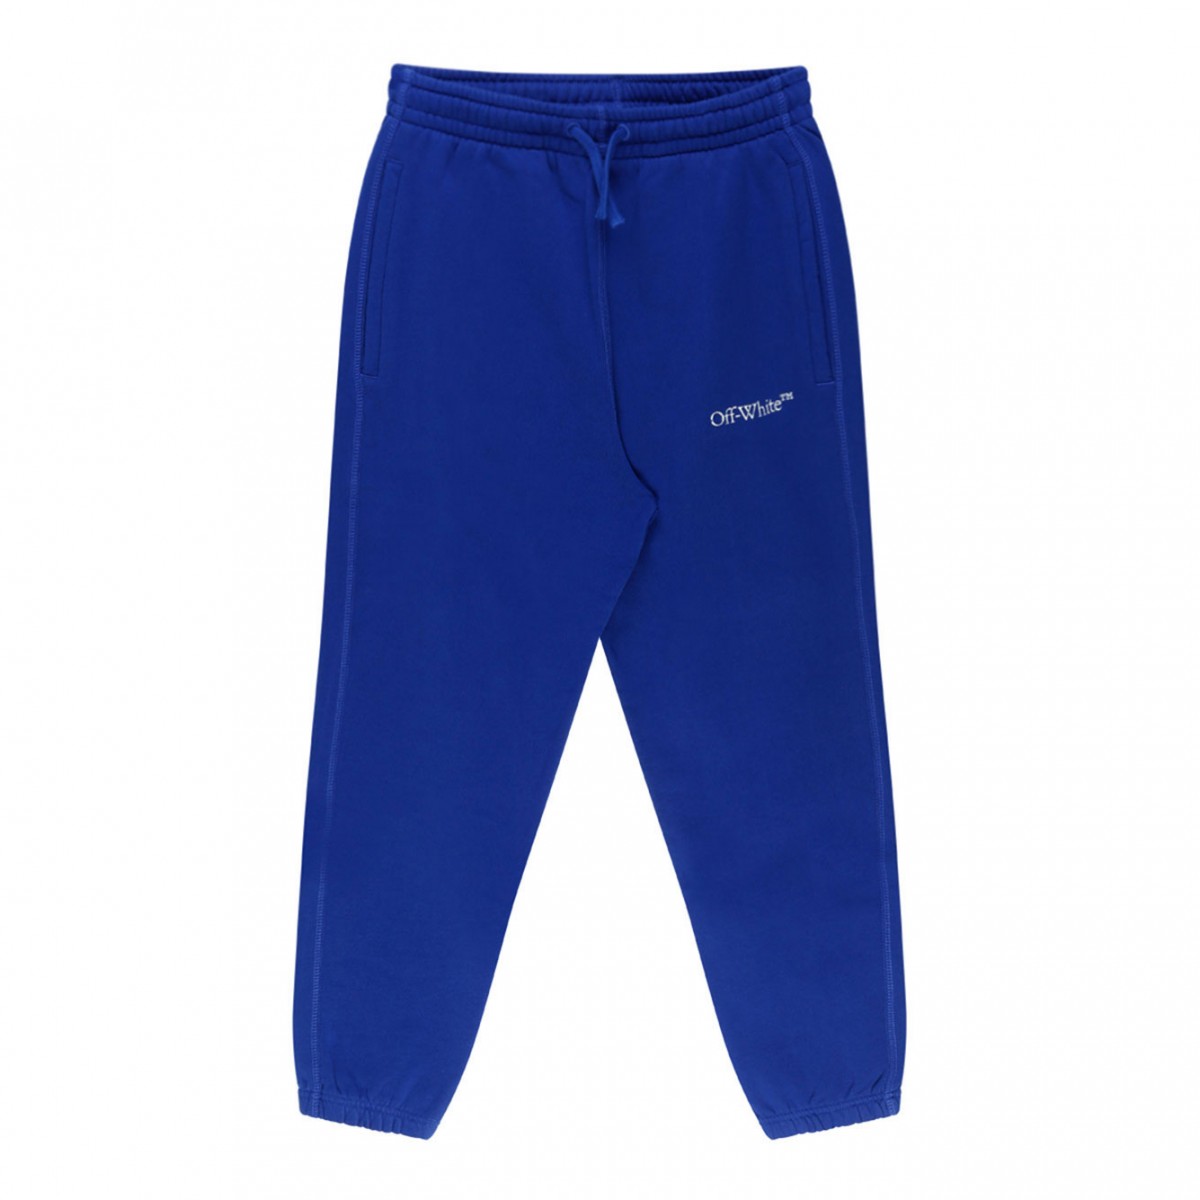 Royal Blue and White Cotton Bookish Track Pants